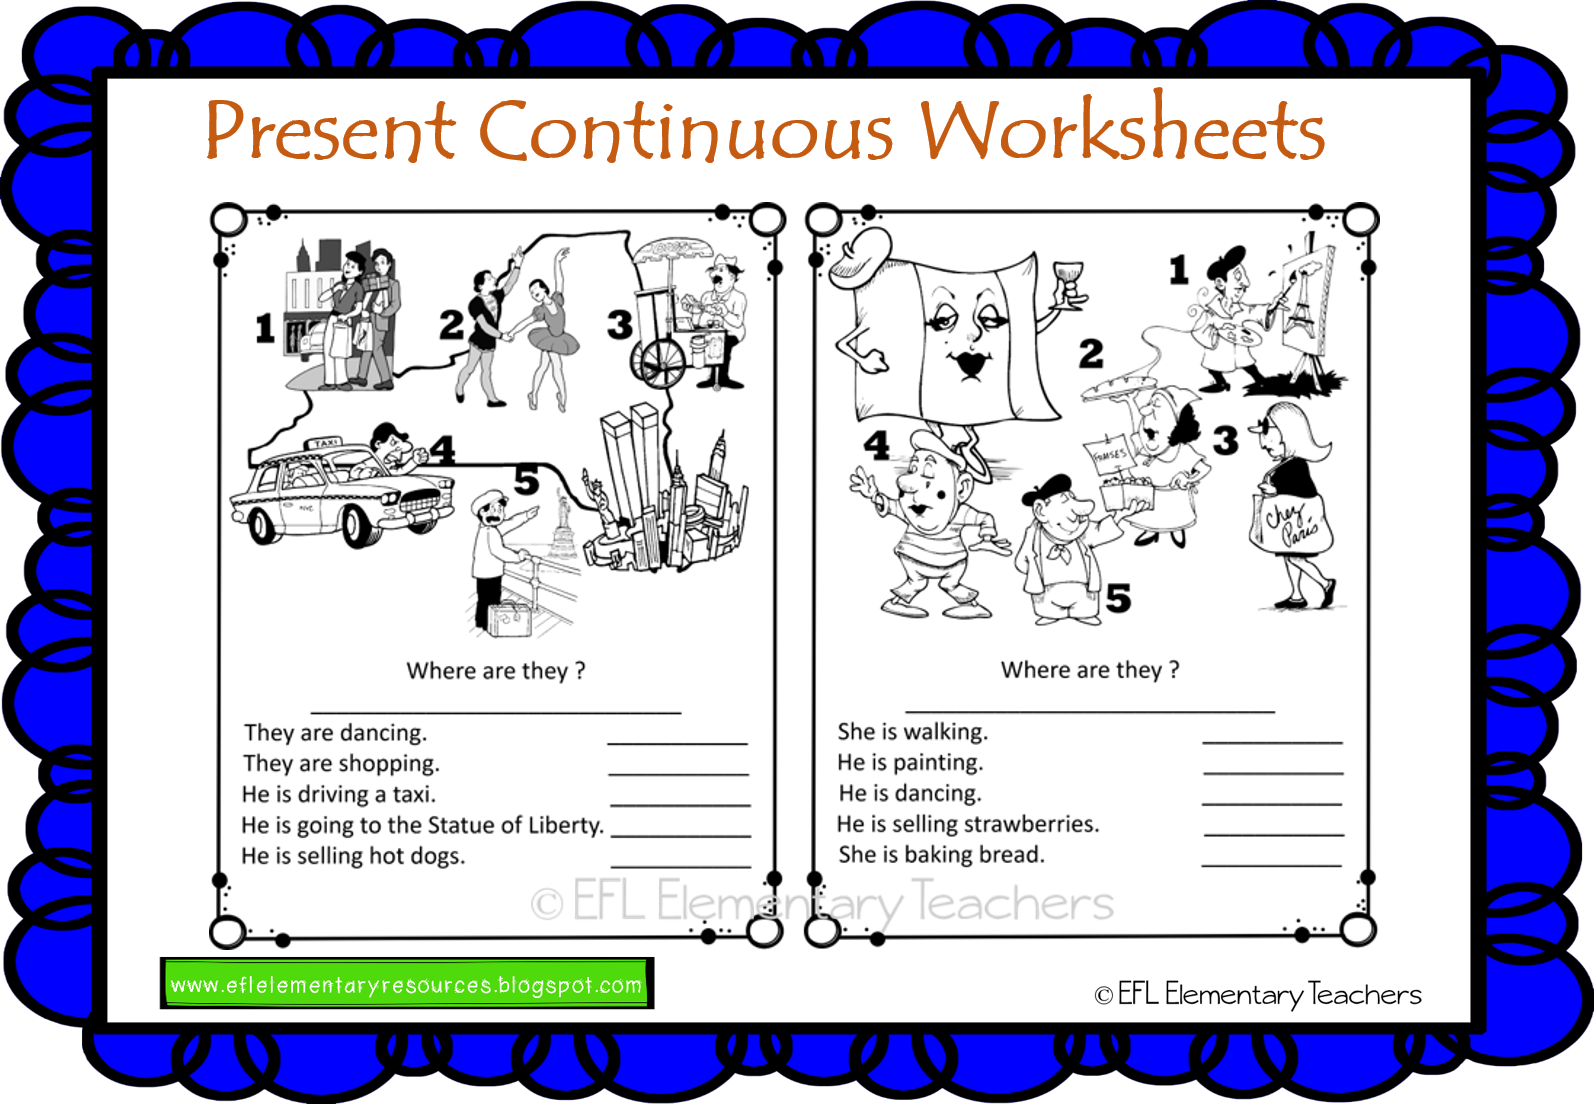 What do they do write like. Present Continuous упражнения 4 класс Worksheets. Present Continuous задания. Задания present simple present Continuous Worksheets. Present simple present Continuous упражнения Worksheets.